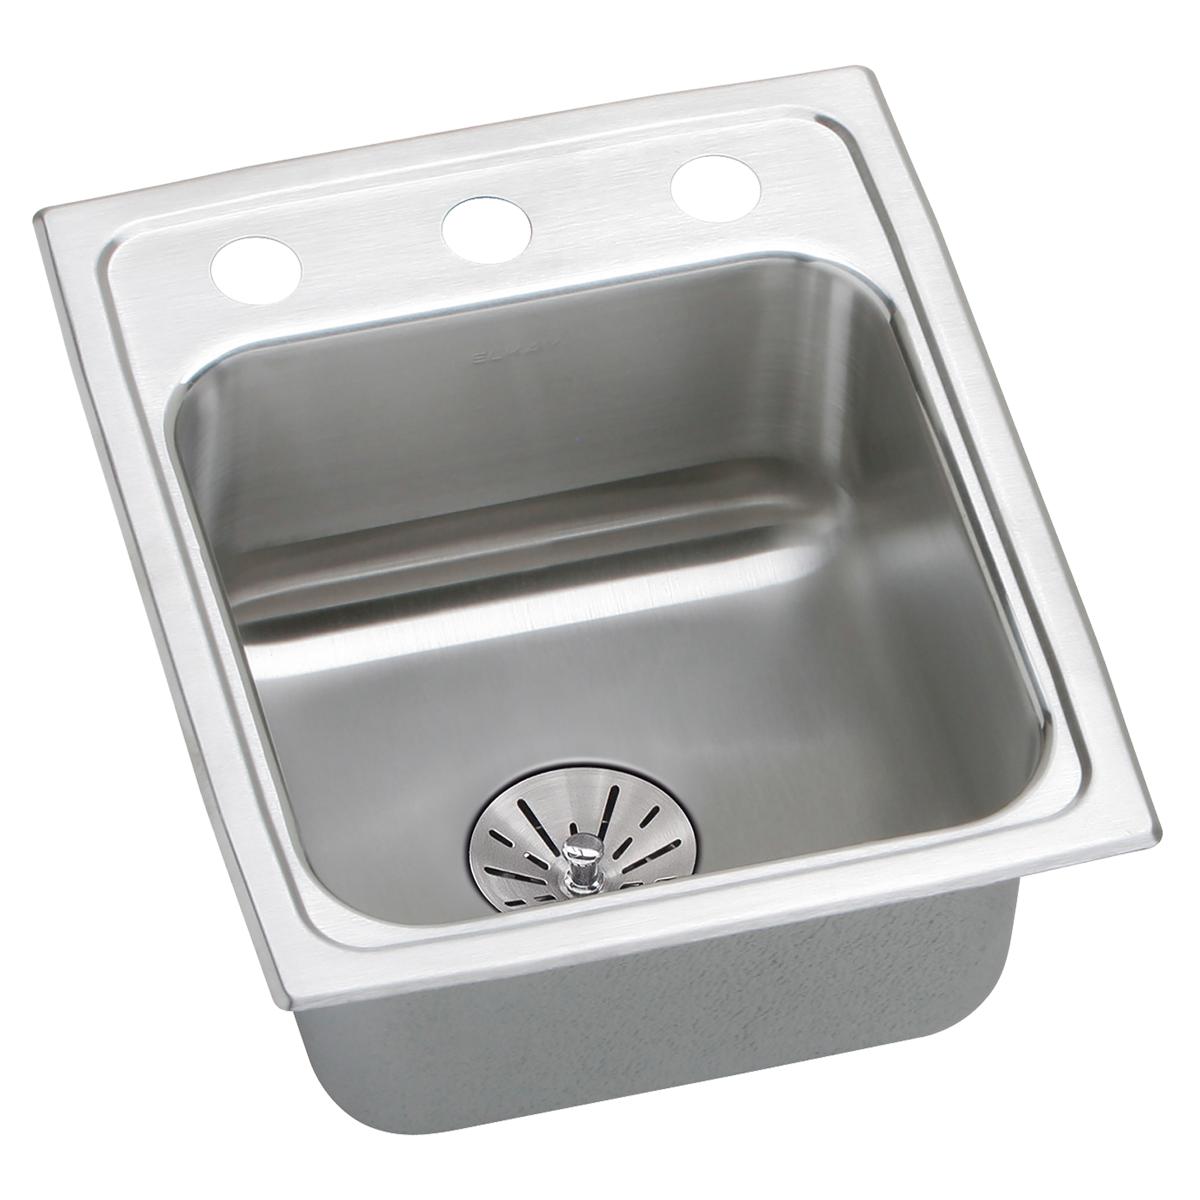 Elkay Lustertone Classic 15" x 17-1/2" x 6-1/2" Single Bowl Drop-in ADA Sink with Perfect Drain and Quick-clip